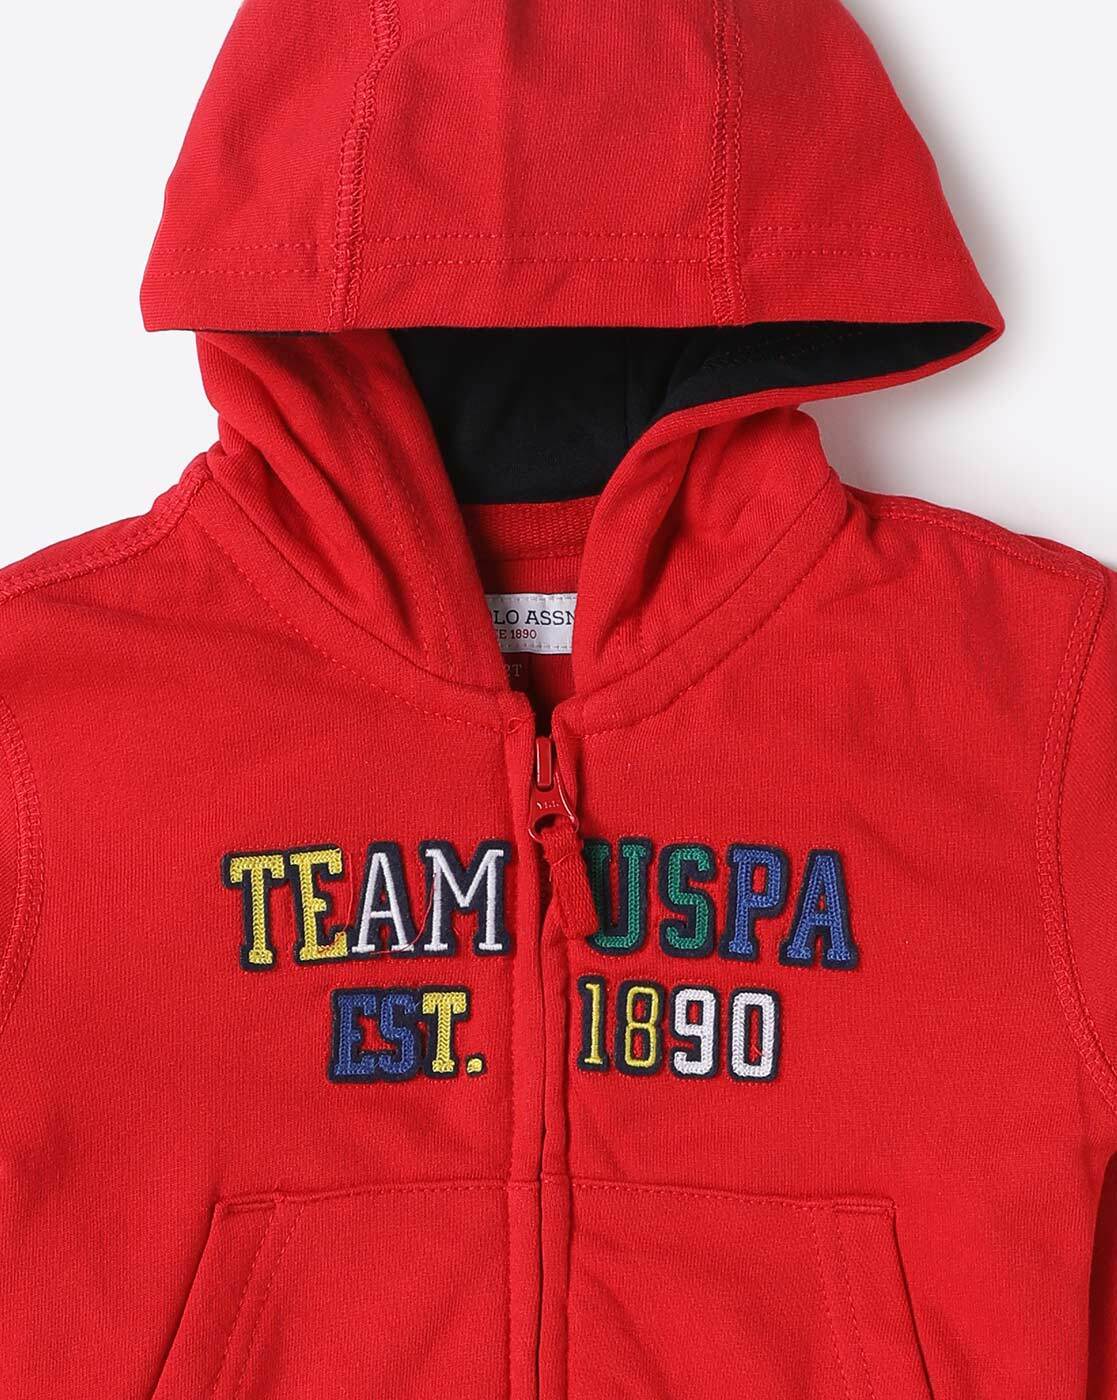 Buy Red Sweatshirts & Hoodie for Boys by U.S. Polo Assn. Online